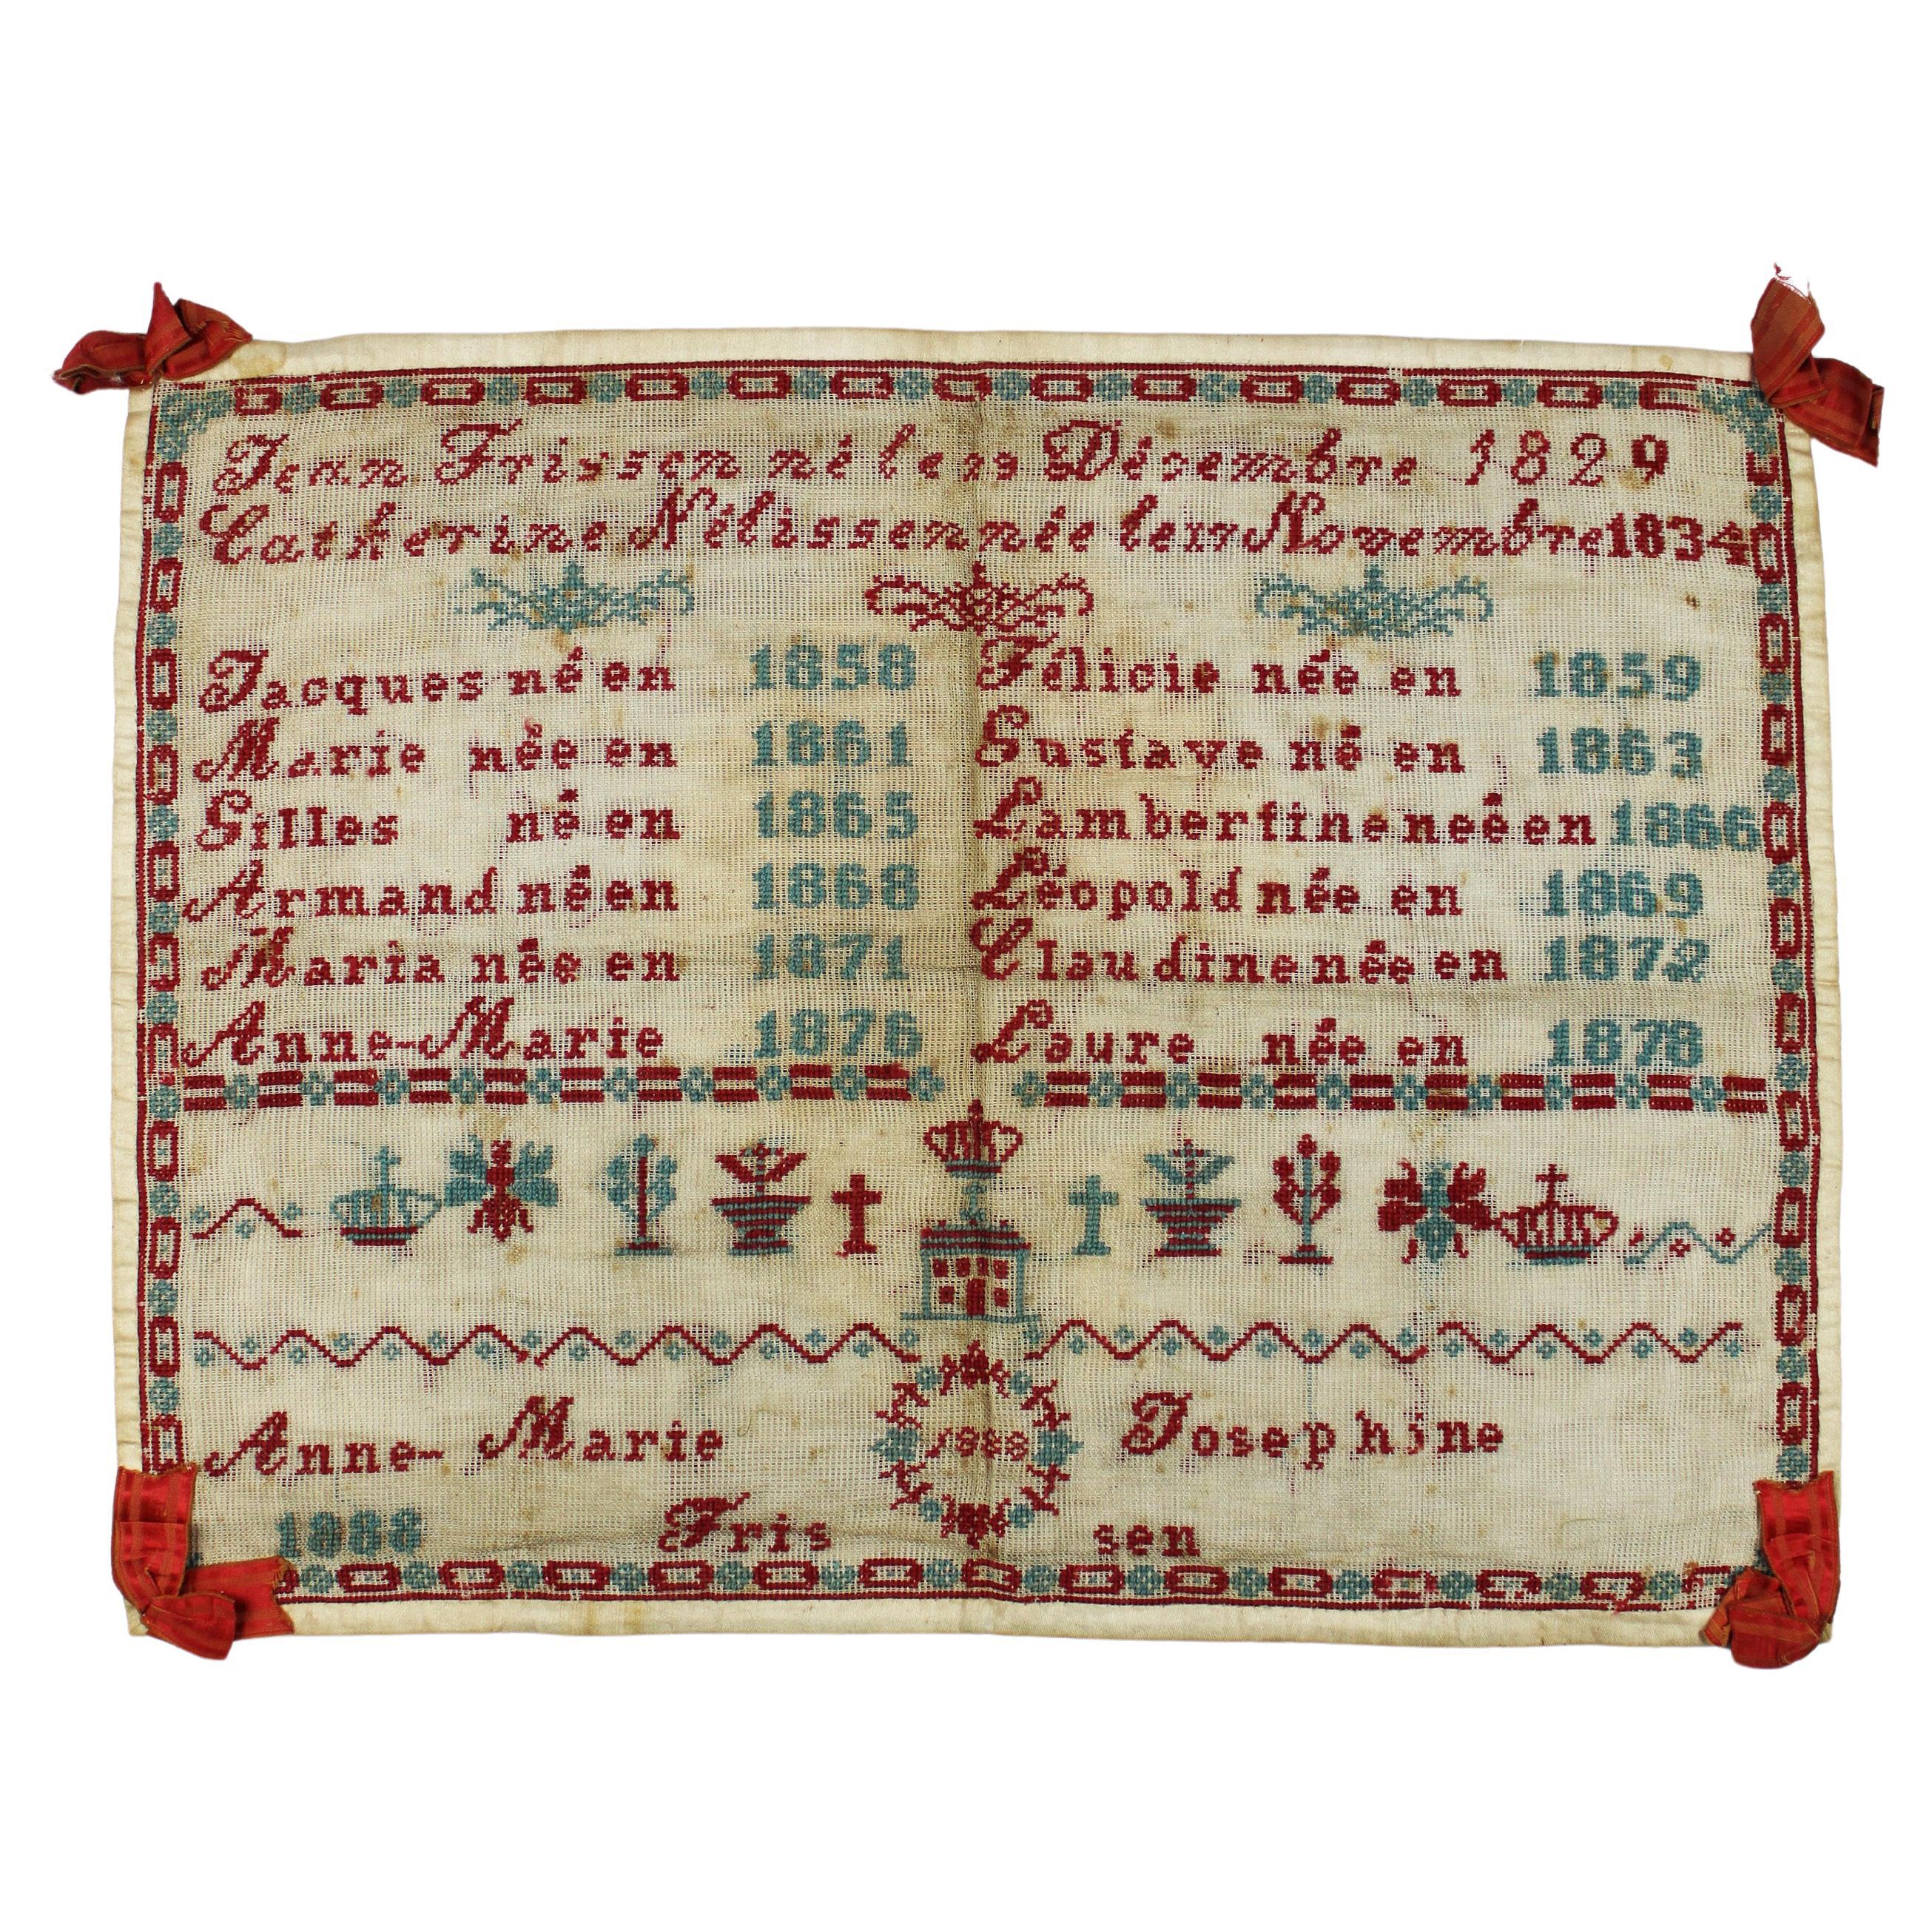 19th Century Sampler Off Family Tree 1888 by Anne Marie Frissen Belgium For Sale